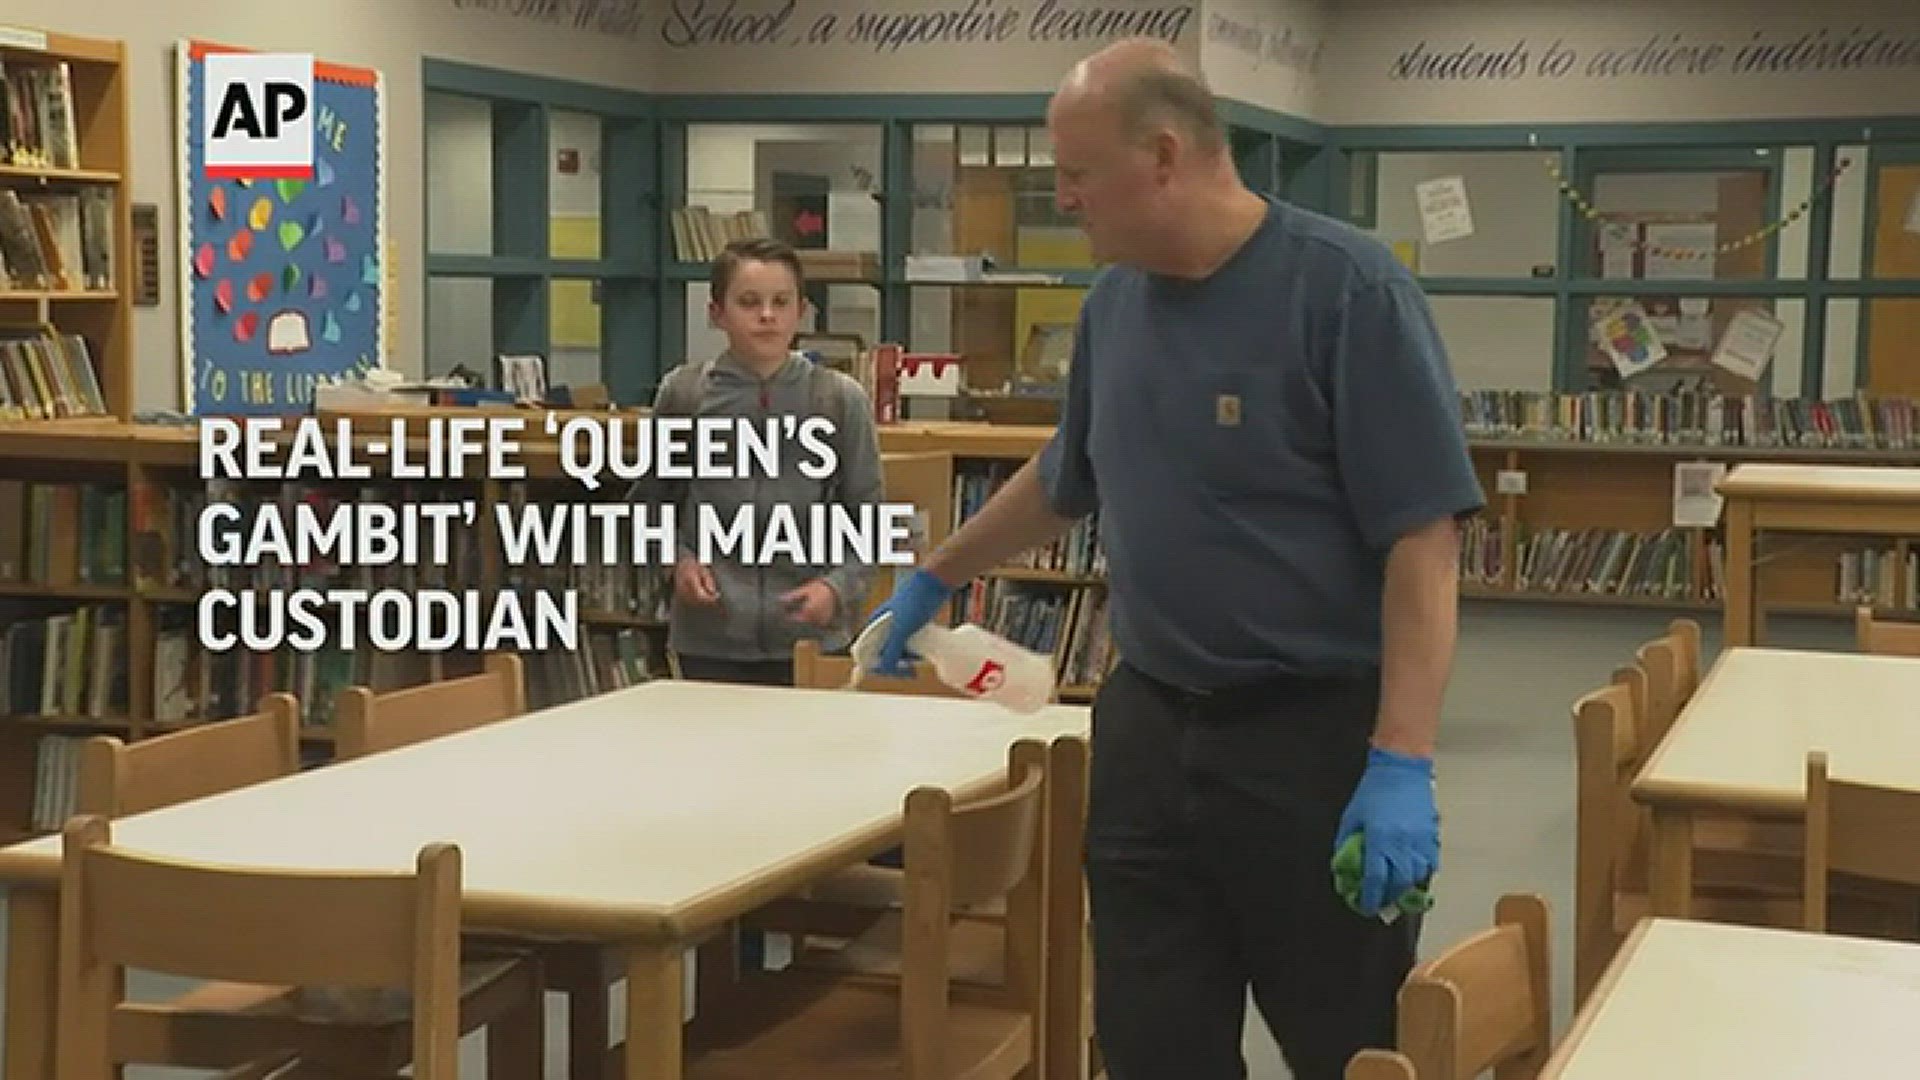 “The Queen’s Gambit” is playing out in real life in Maine, after custodian David Bishop coached two school chess teams to victory. (AP Video: Rodrique Ngowi)